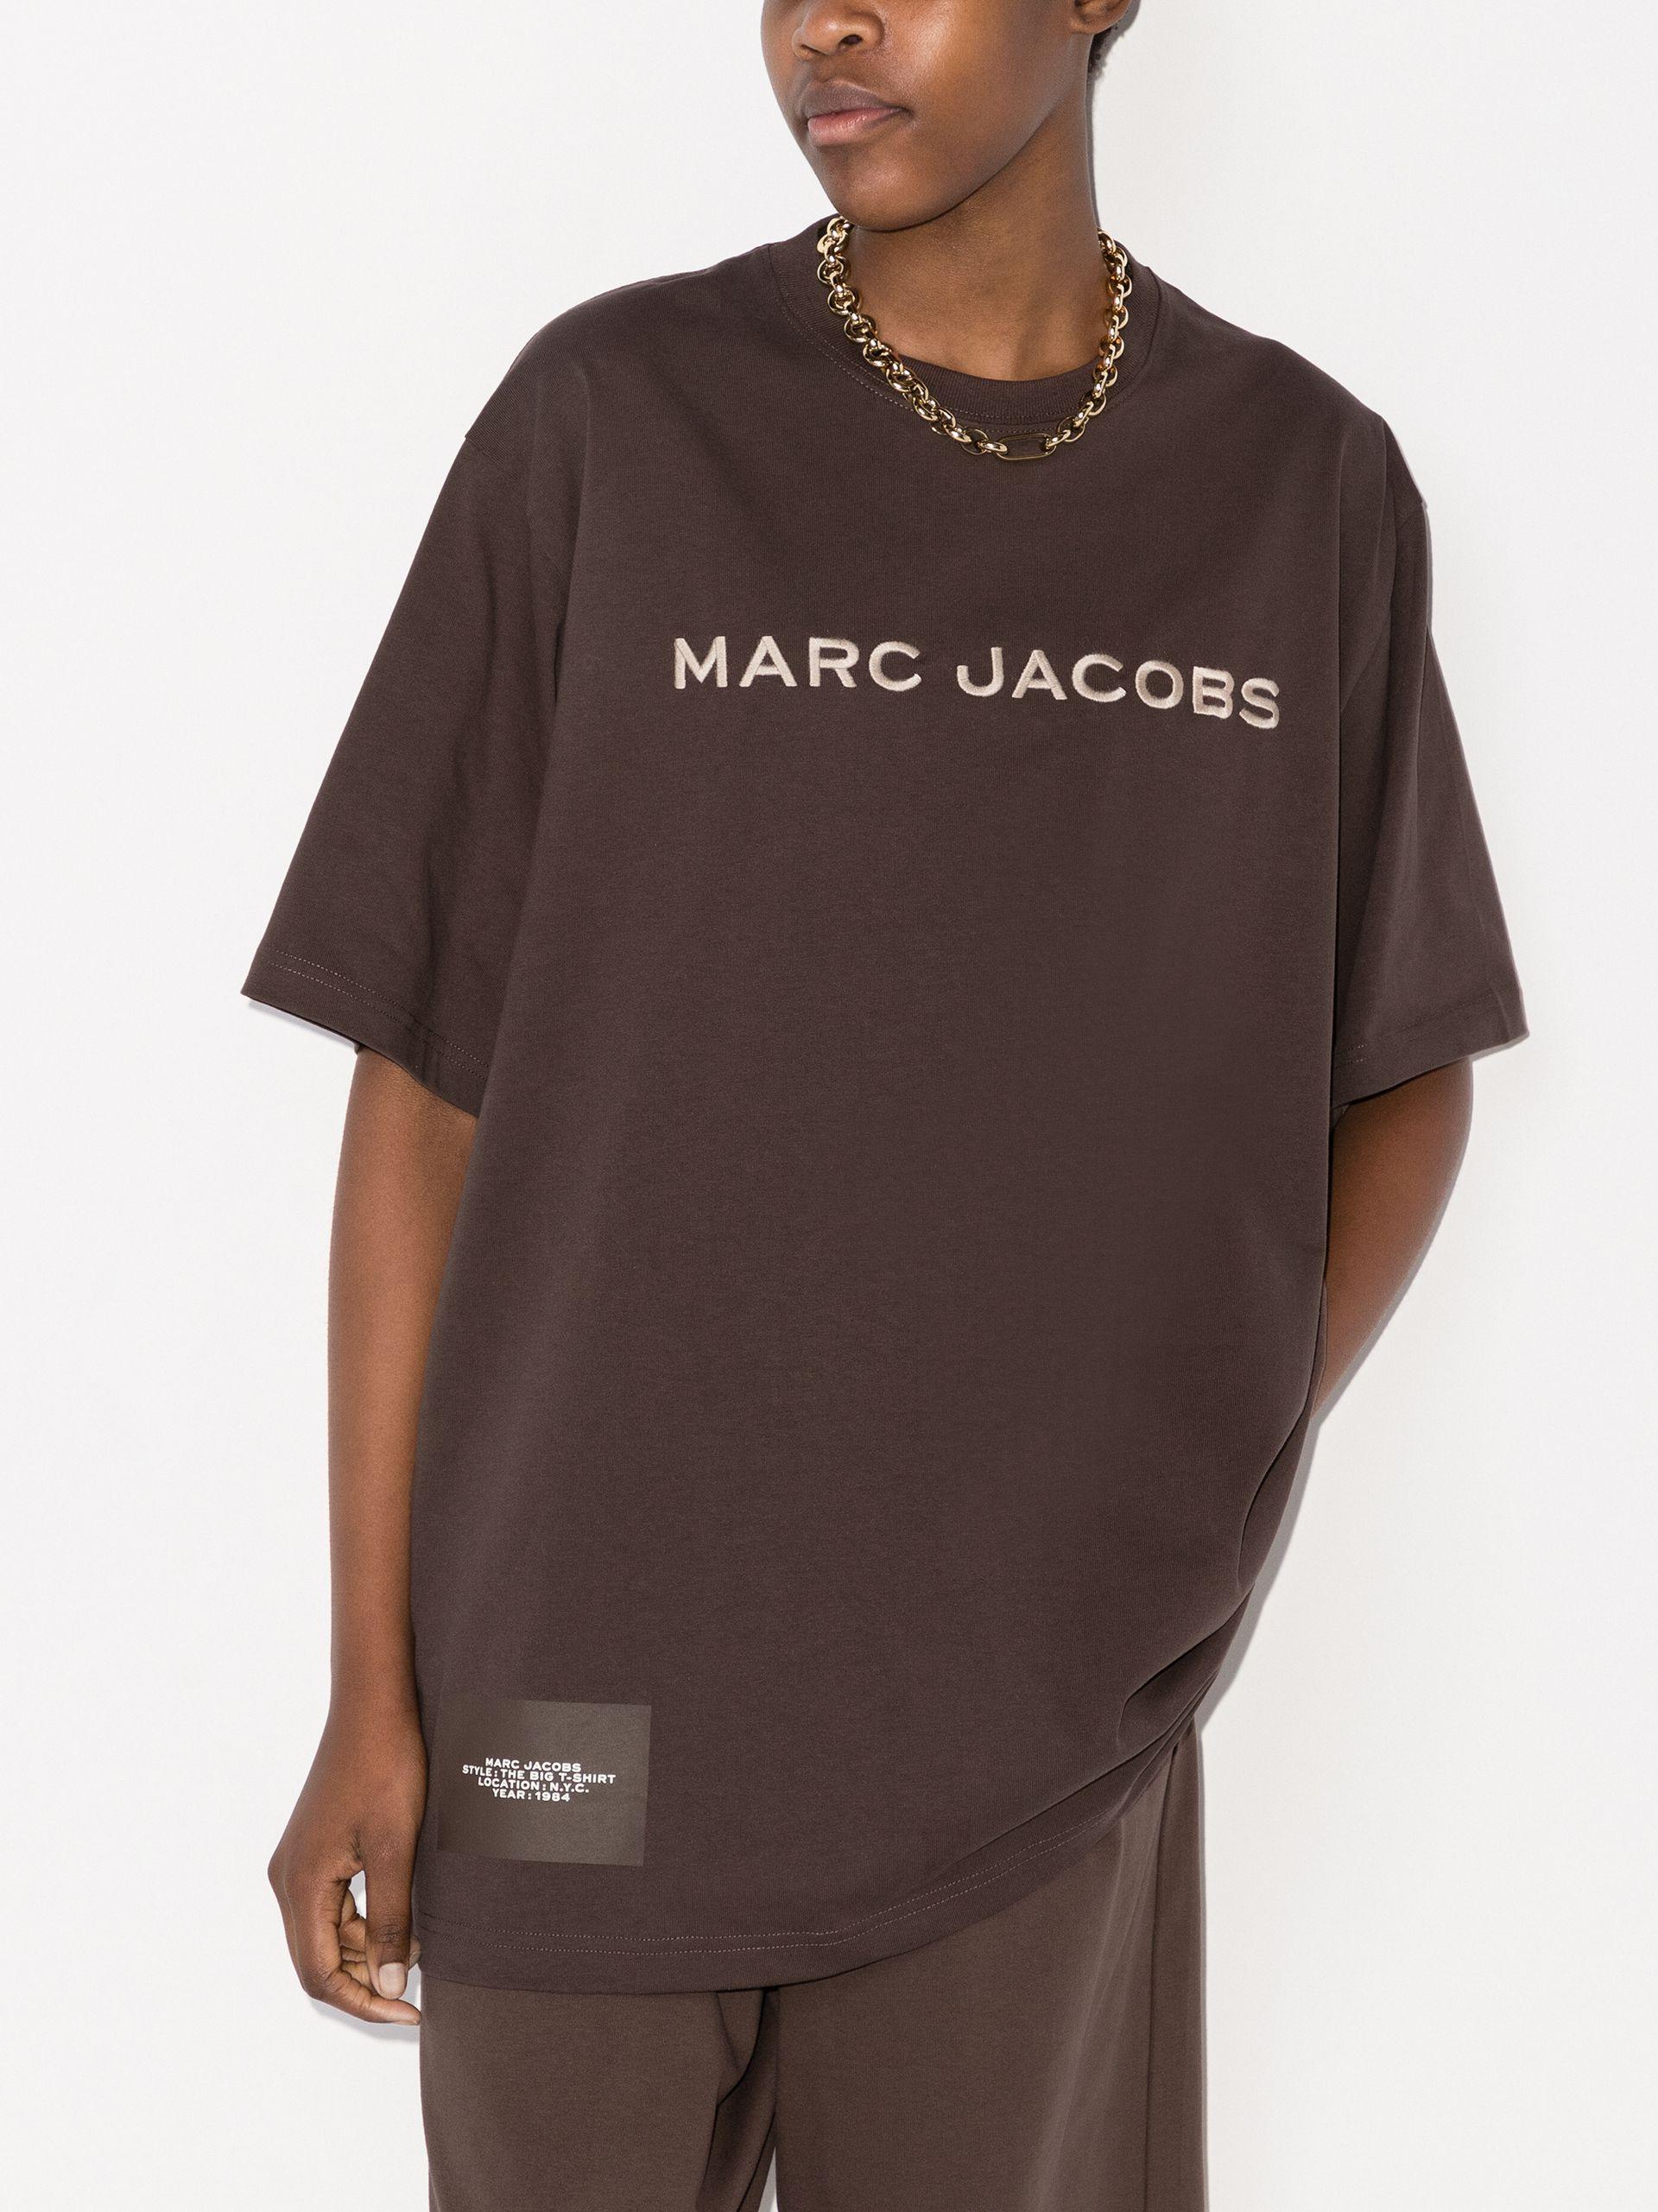 Marc Jacobs The Big Cotton T-shirt in Brown | Lyst